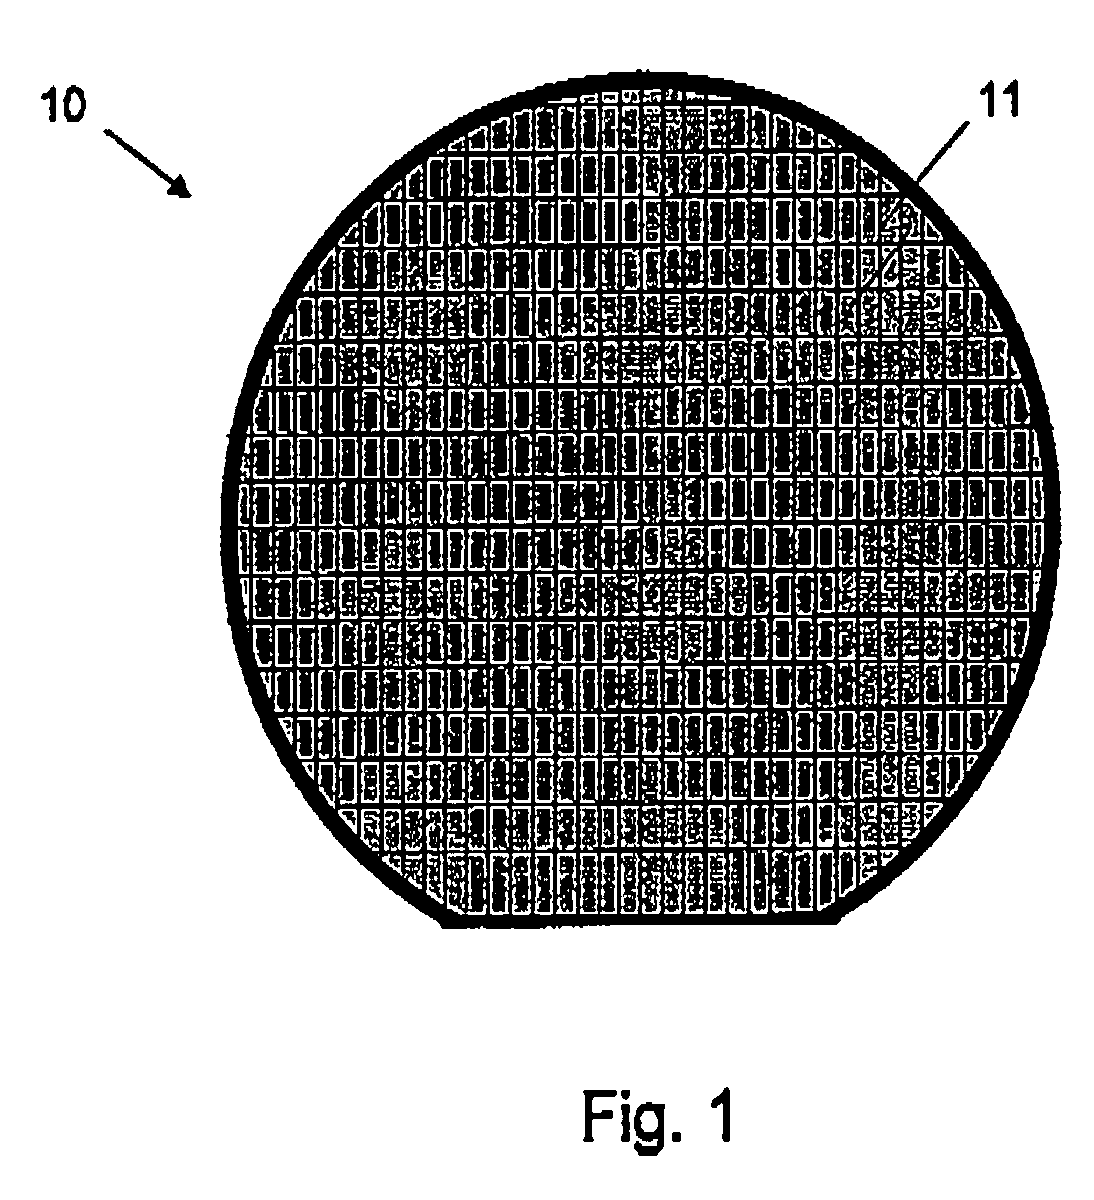 Program-controlled dicing of a substrate using a pulsed laser